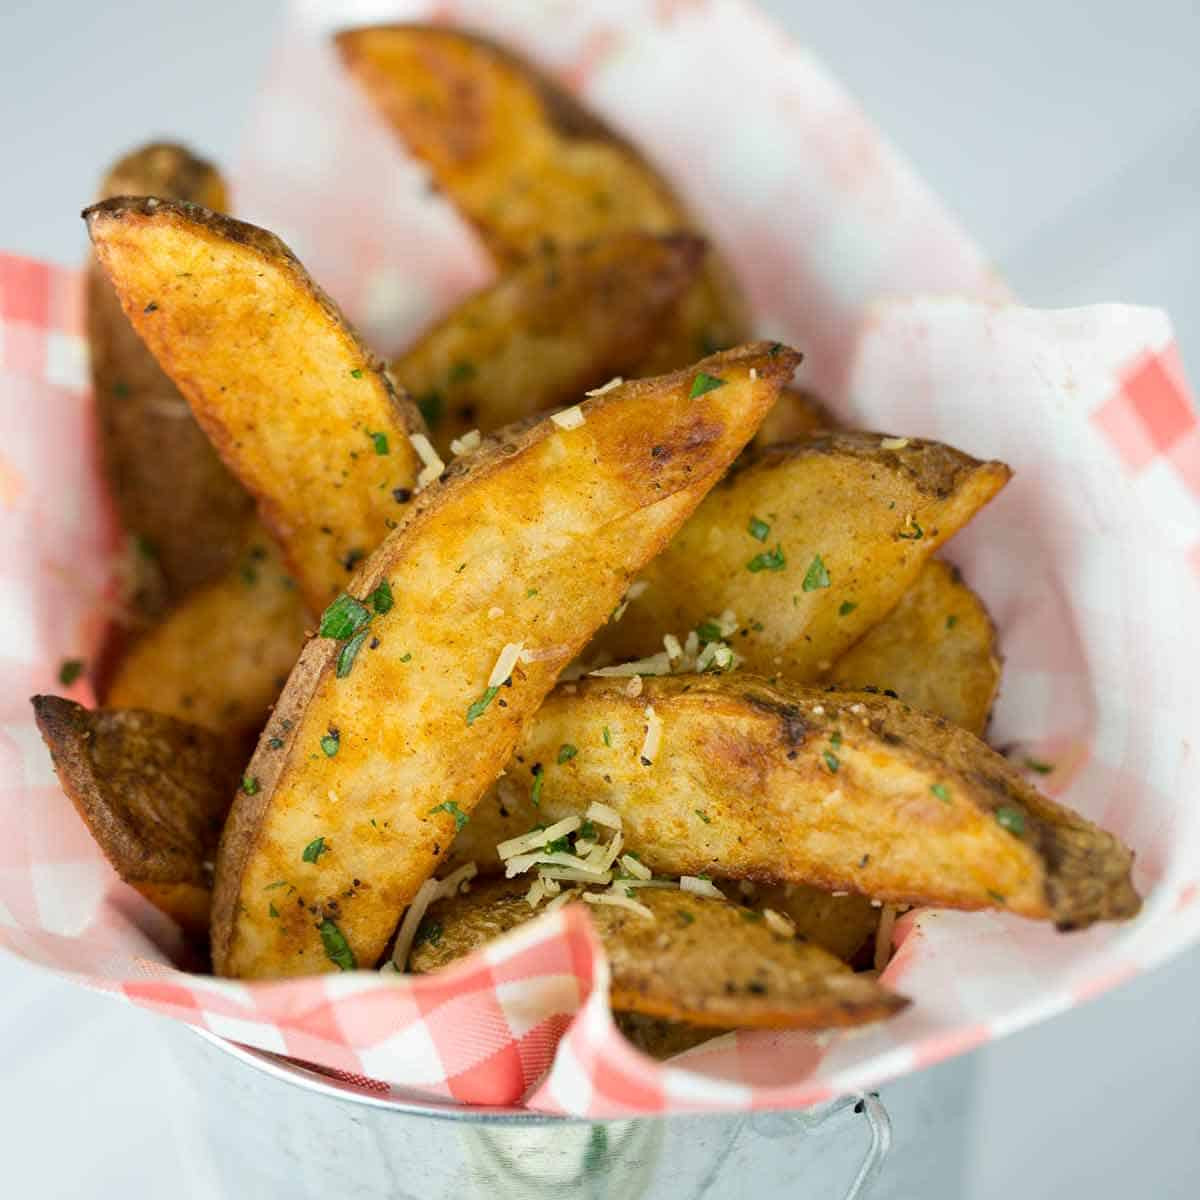 Crispy Baked Potato Wedges
 Oven Baked Potato Wedges with Dipping Sauce